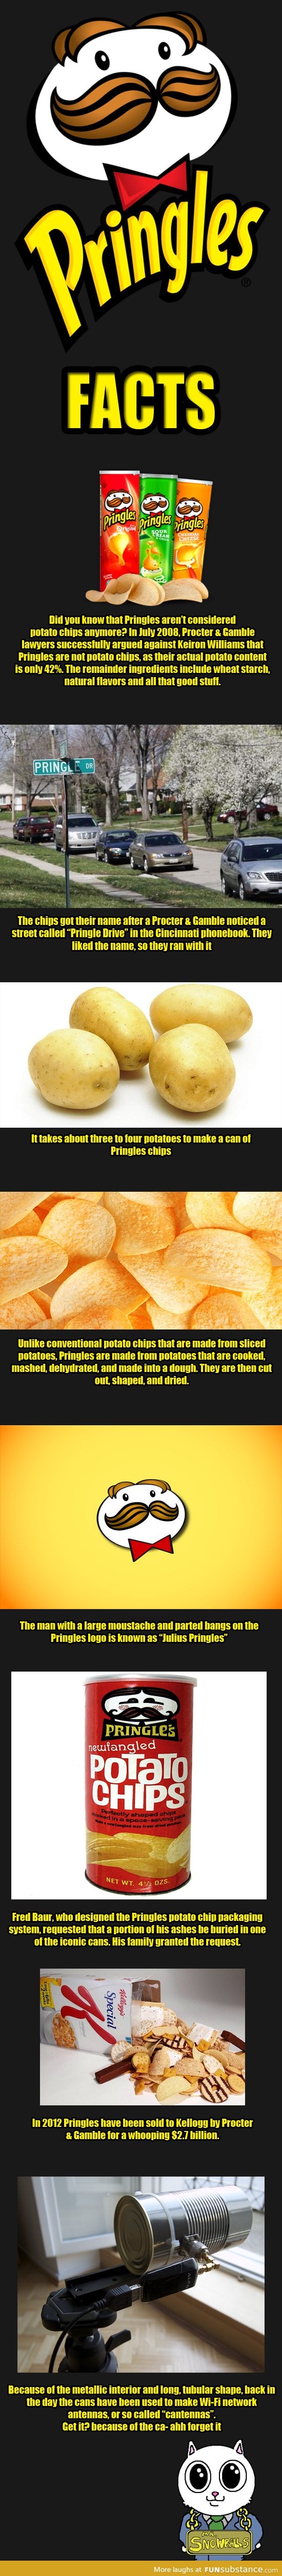 Pringles facts compilation